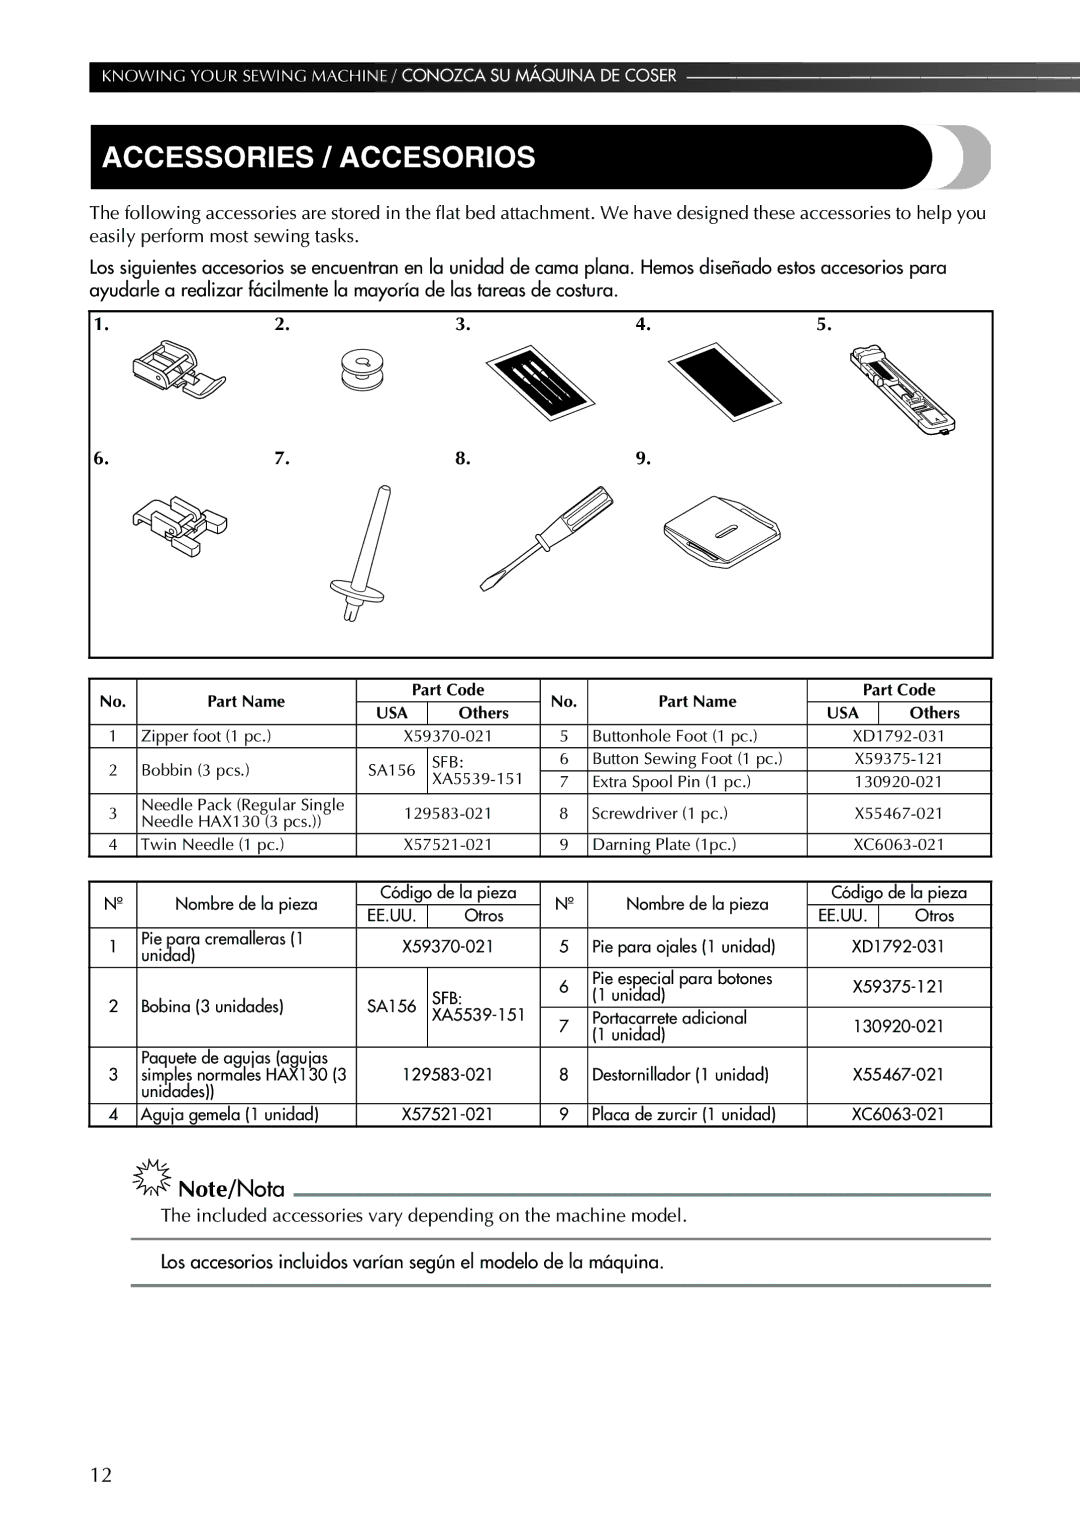 Brother XL-2600 operation manual Accessories / Accesorios, Part Name Part Code 